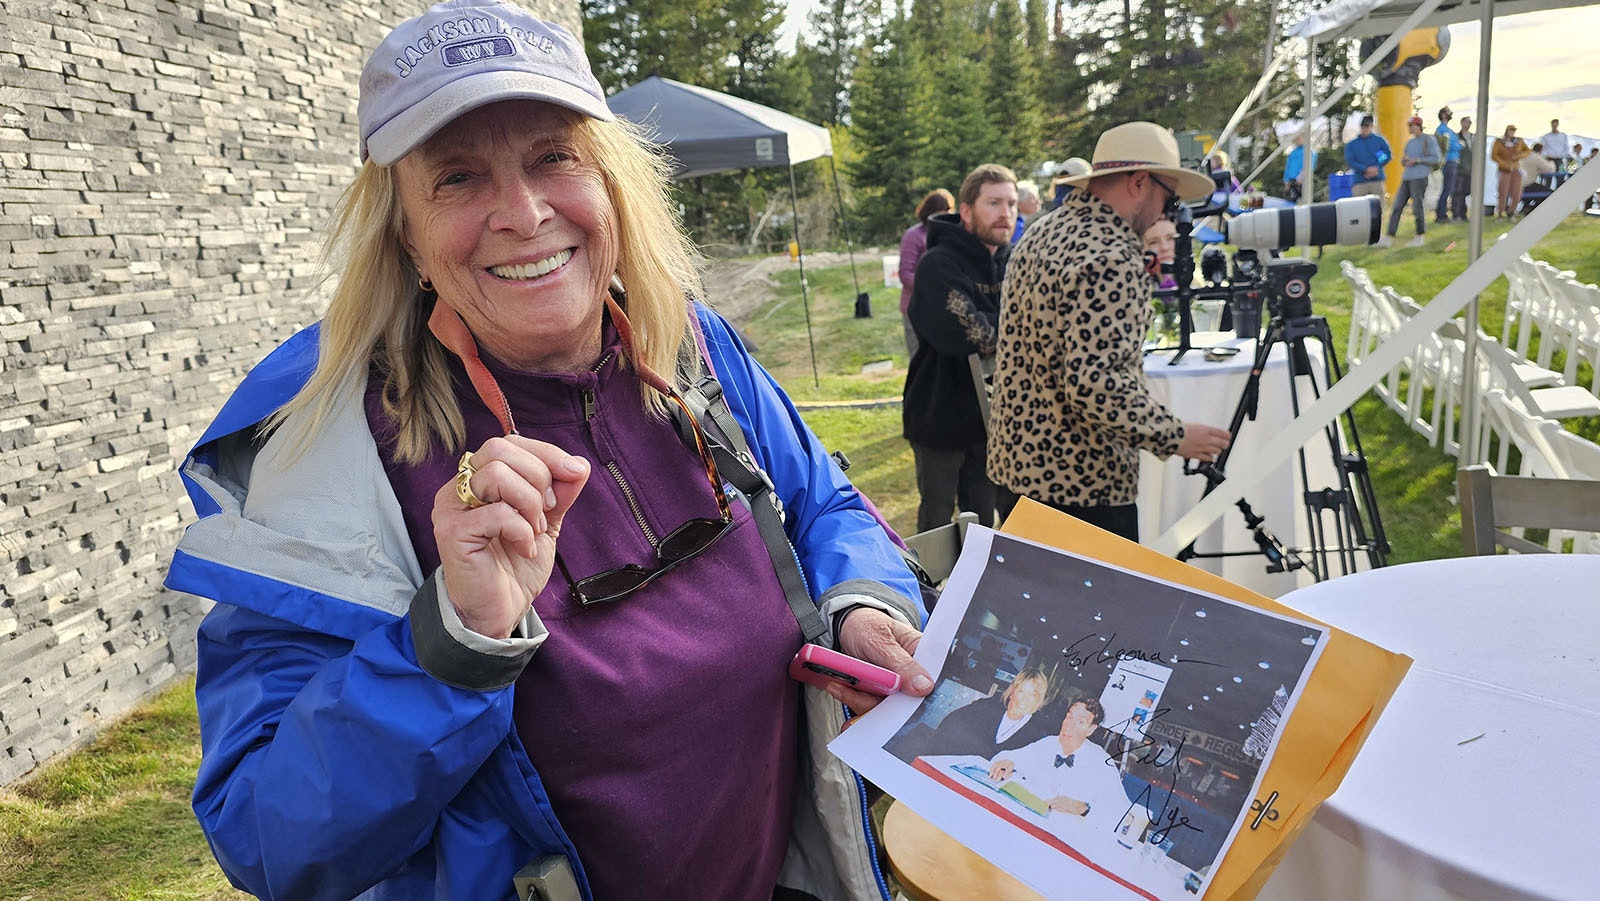 Retired teacher Leona Wunnenberg shows off the photograph she got Bill Nye to sign of her with the Science Guy during a 2005 conference in Reno.